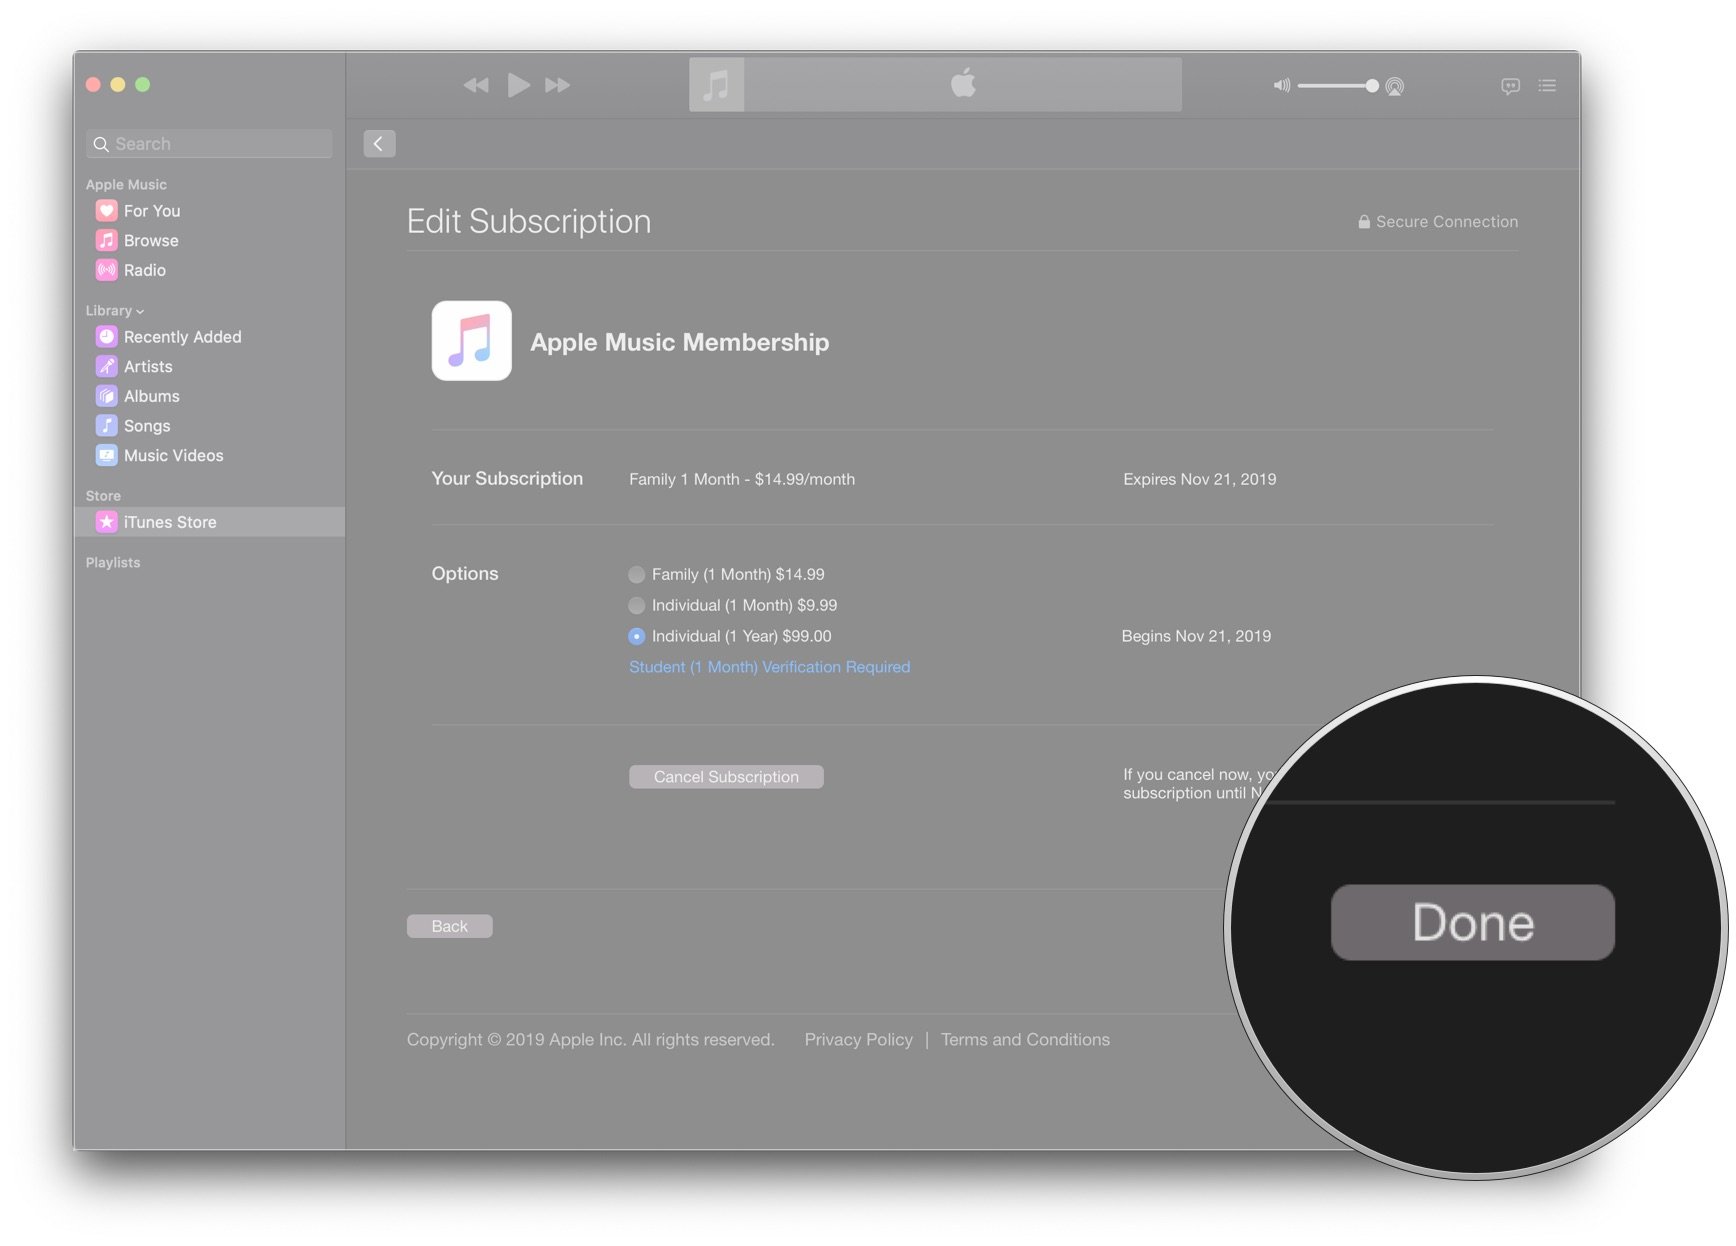 Switch to individual plan for Apple Music on Mac by showing: Click Done